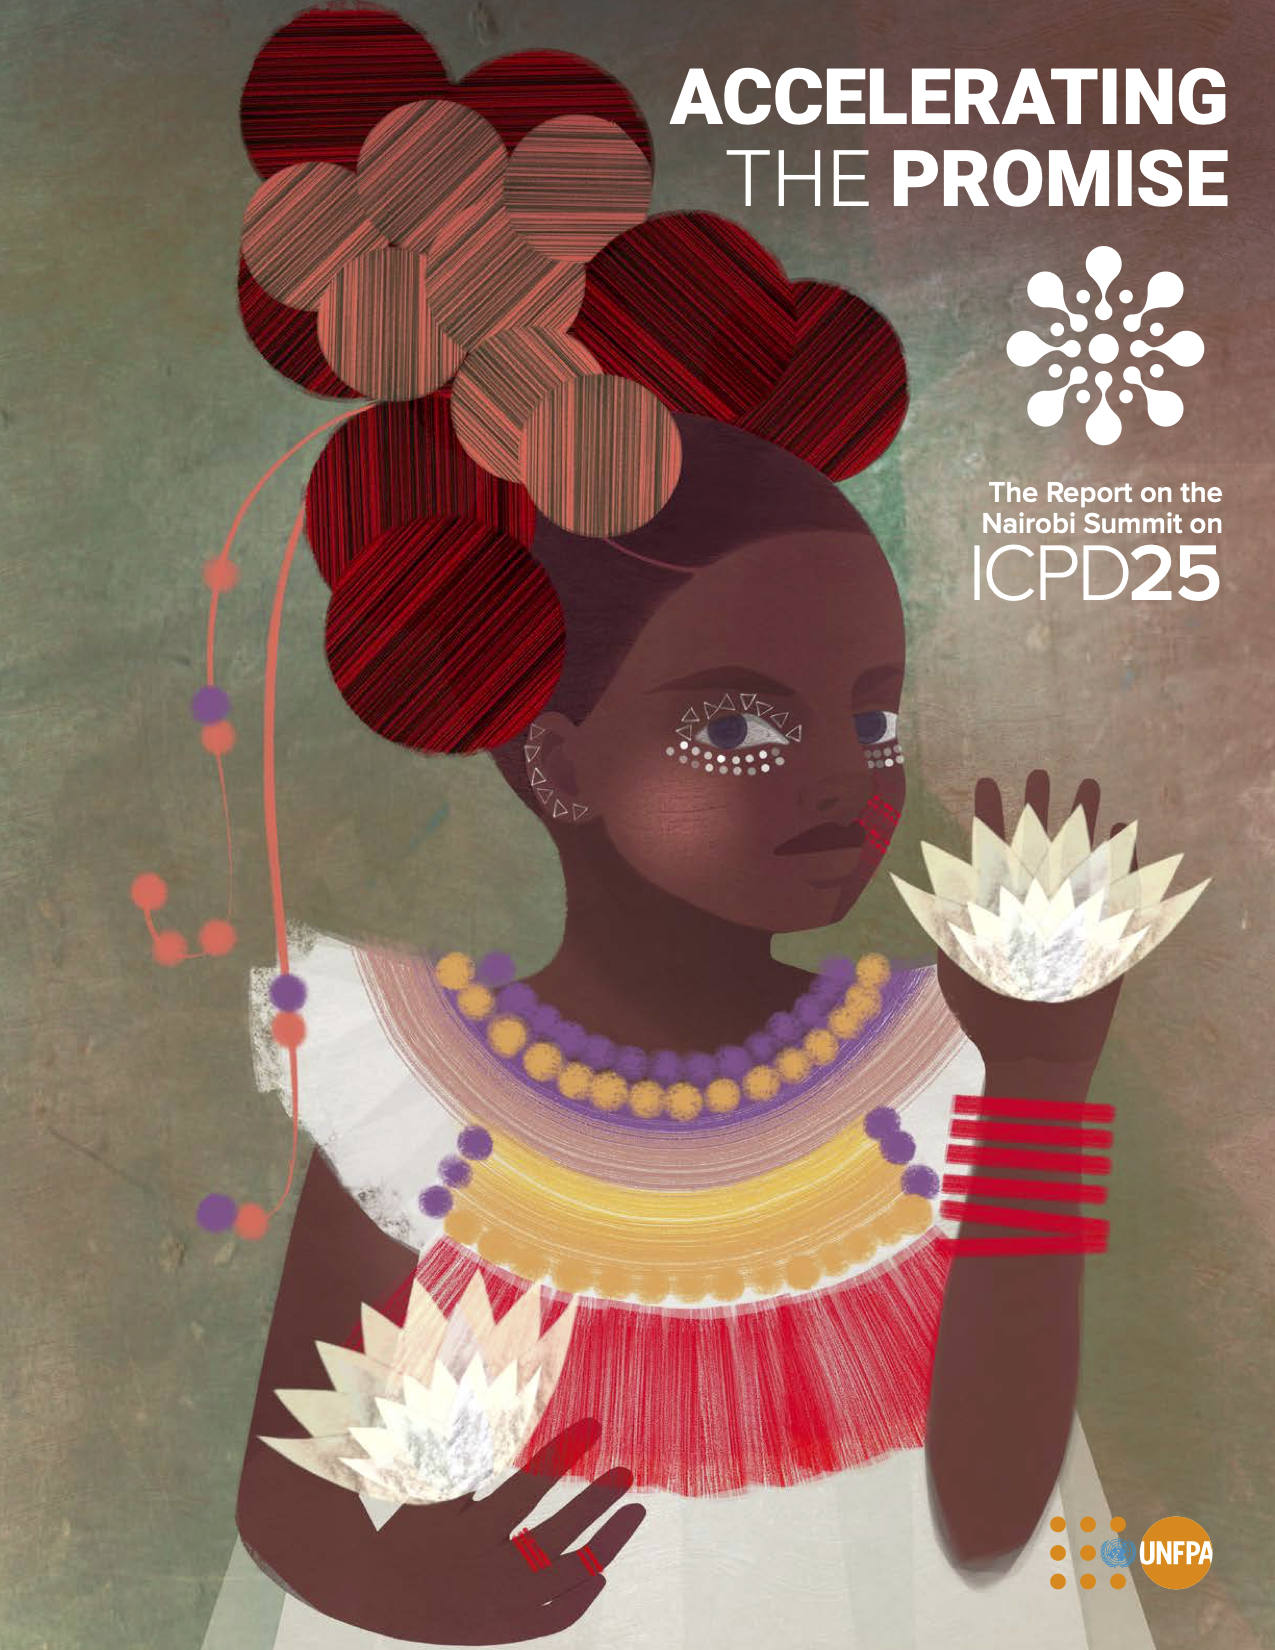 Accelerating the Promise: The report on the Nairobi Summit on ICPD25